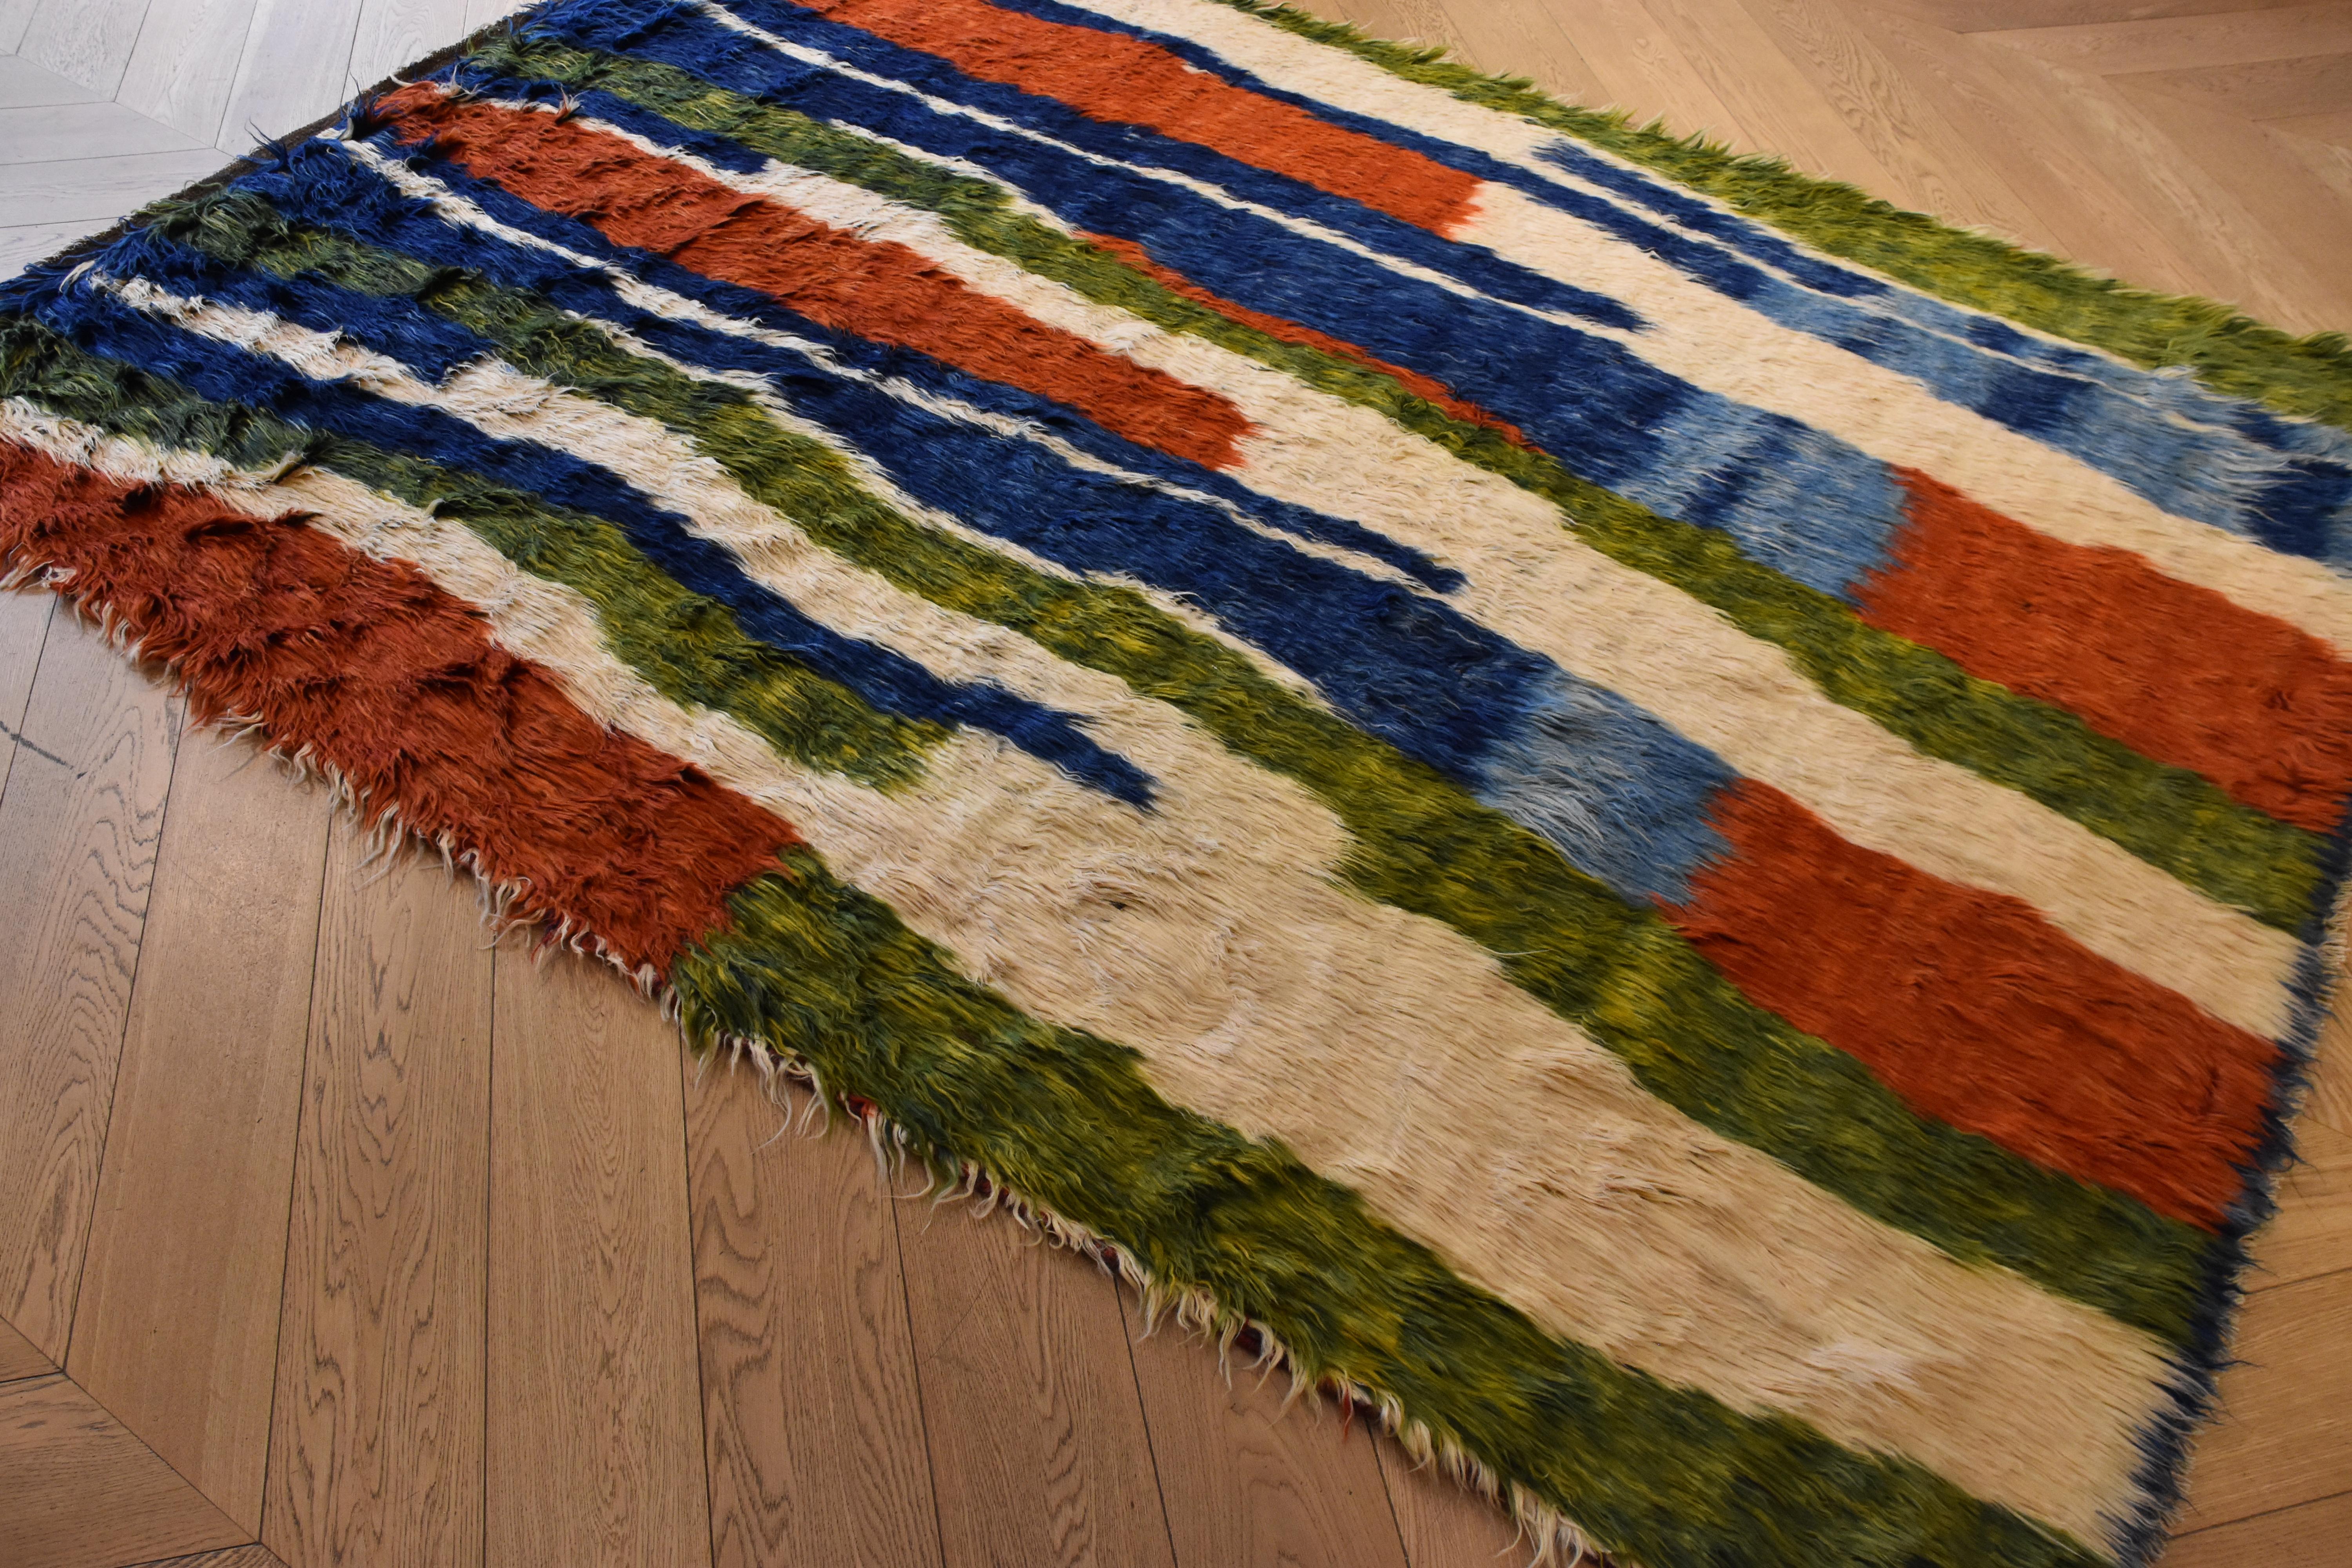 These rugs come from the villages of Afghanistan. Their characteristic is the very long and soft hair of wool and the Minimalist decoration that draws inspiration from the tradition of nomadic populations. The wools are hand-dyed with natural